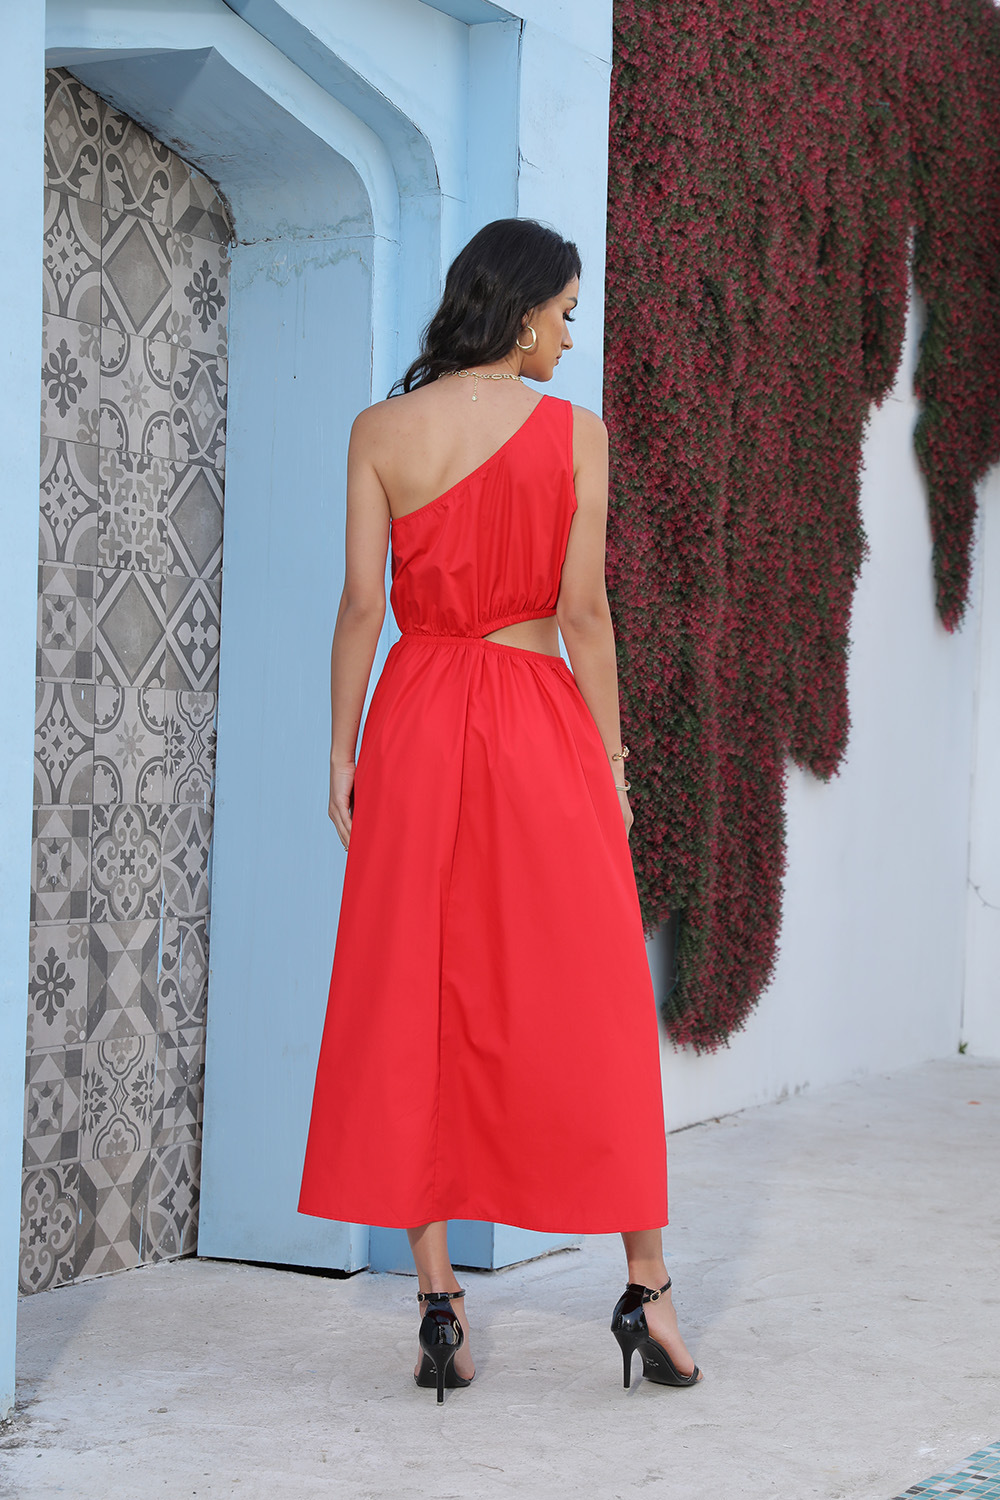 Strapless vacation beach dress France style red dress